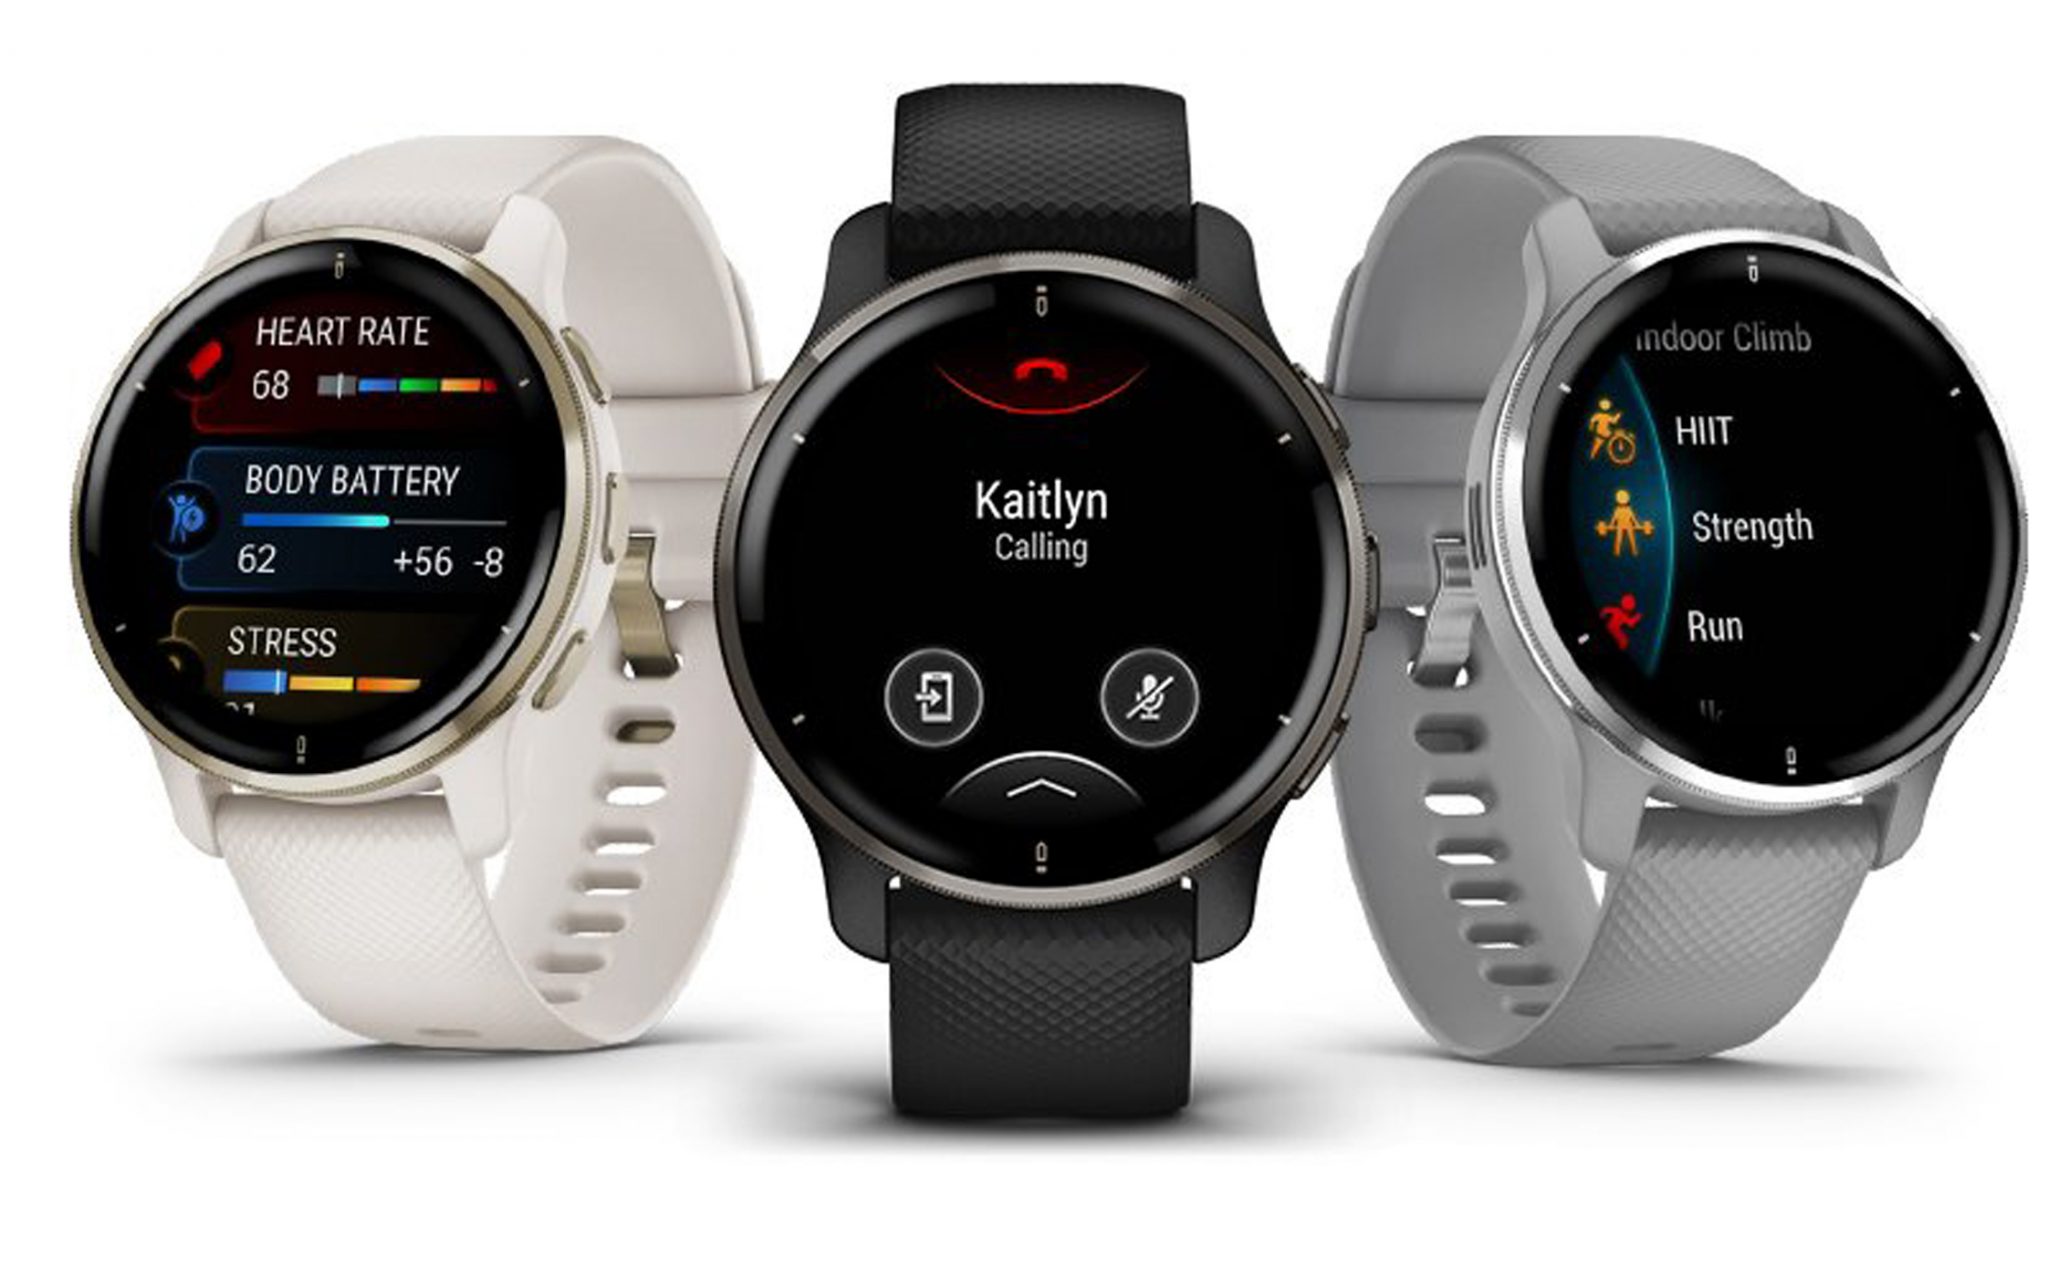 Garmin smartwatches ranked among best wearables at Consumer Electronics Show